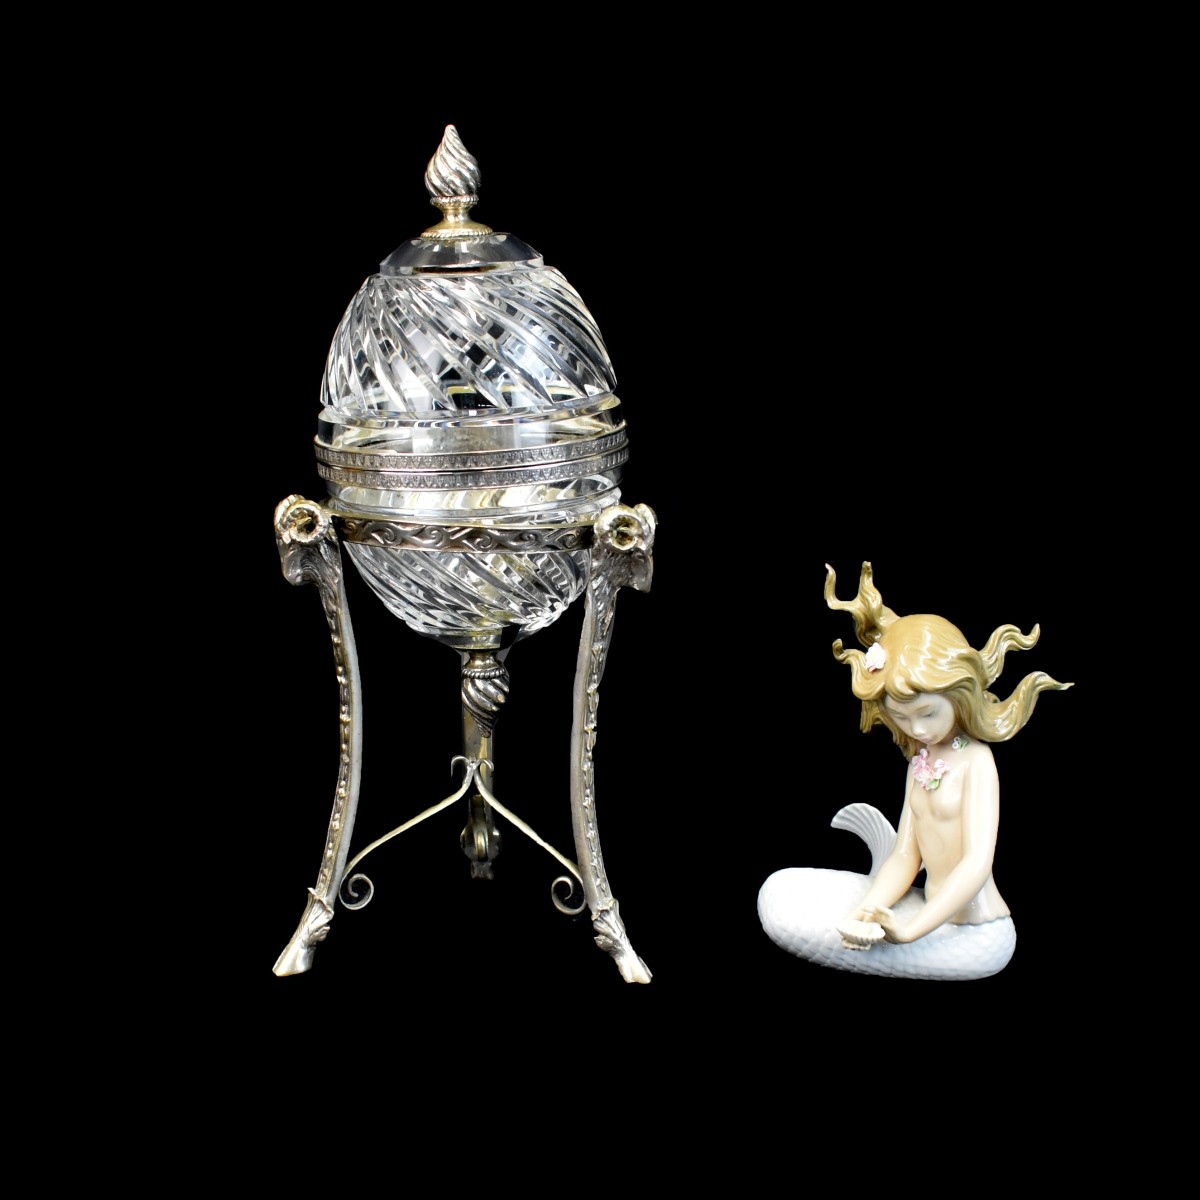 Assorted Tableware Dome Server and Lladro